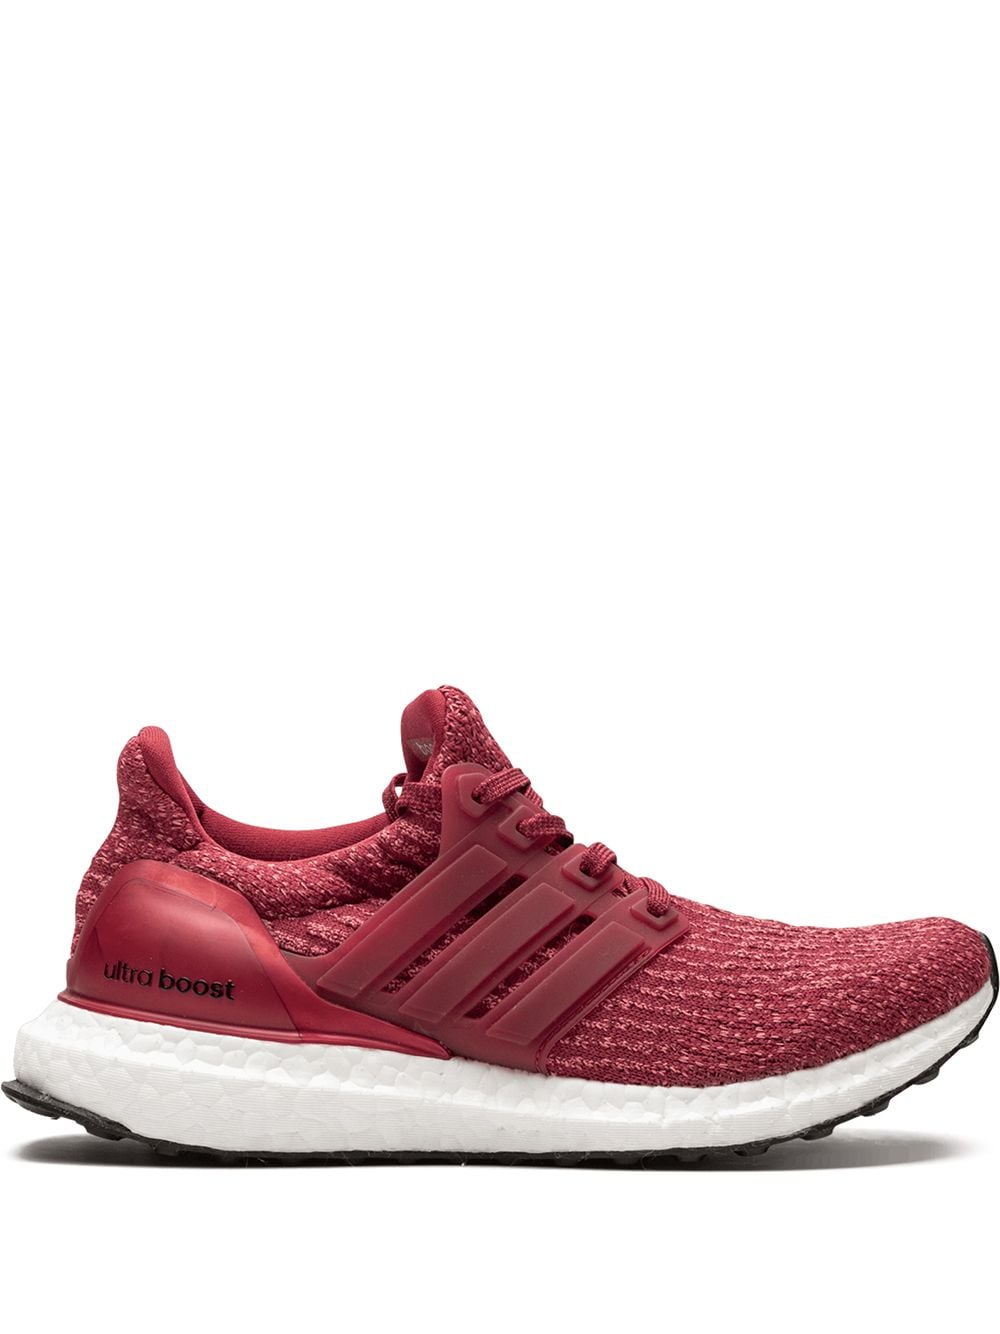 adidas Ultraboost "Mystery Red" sneakers von adidas